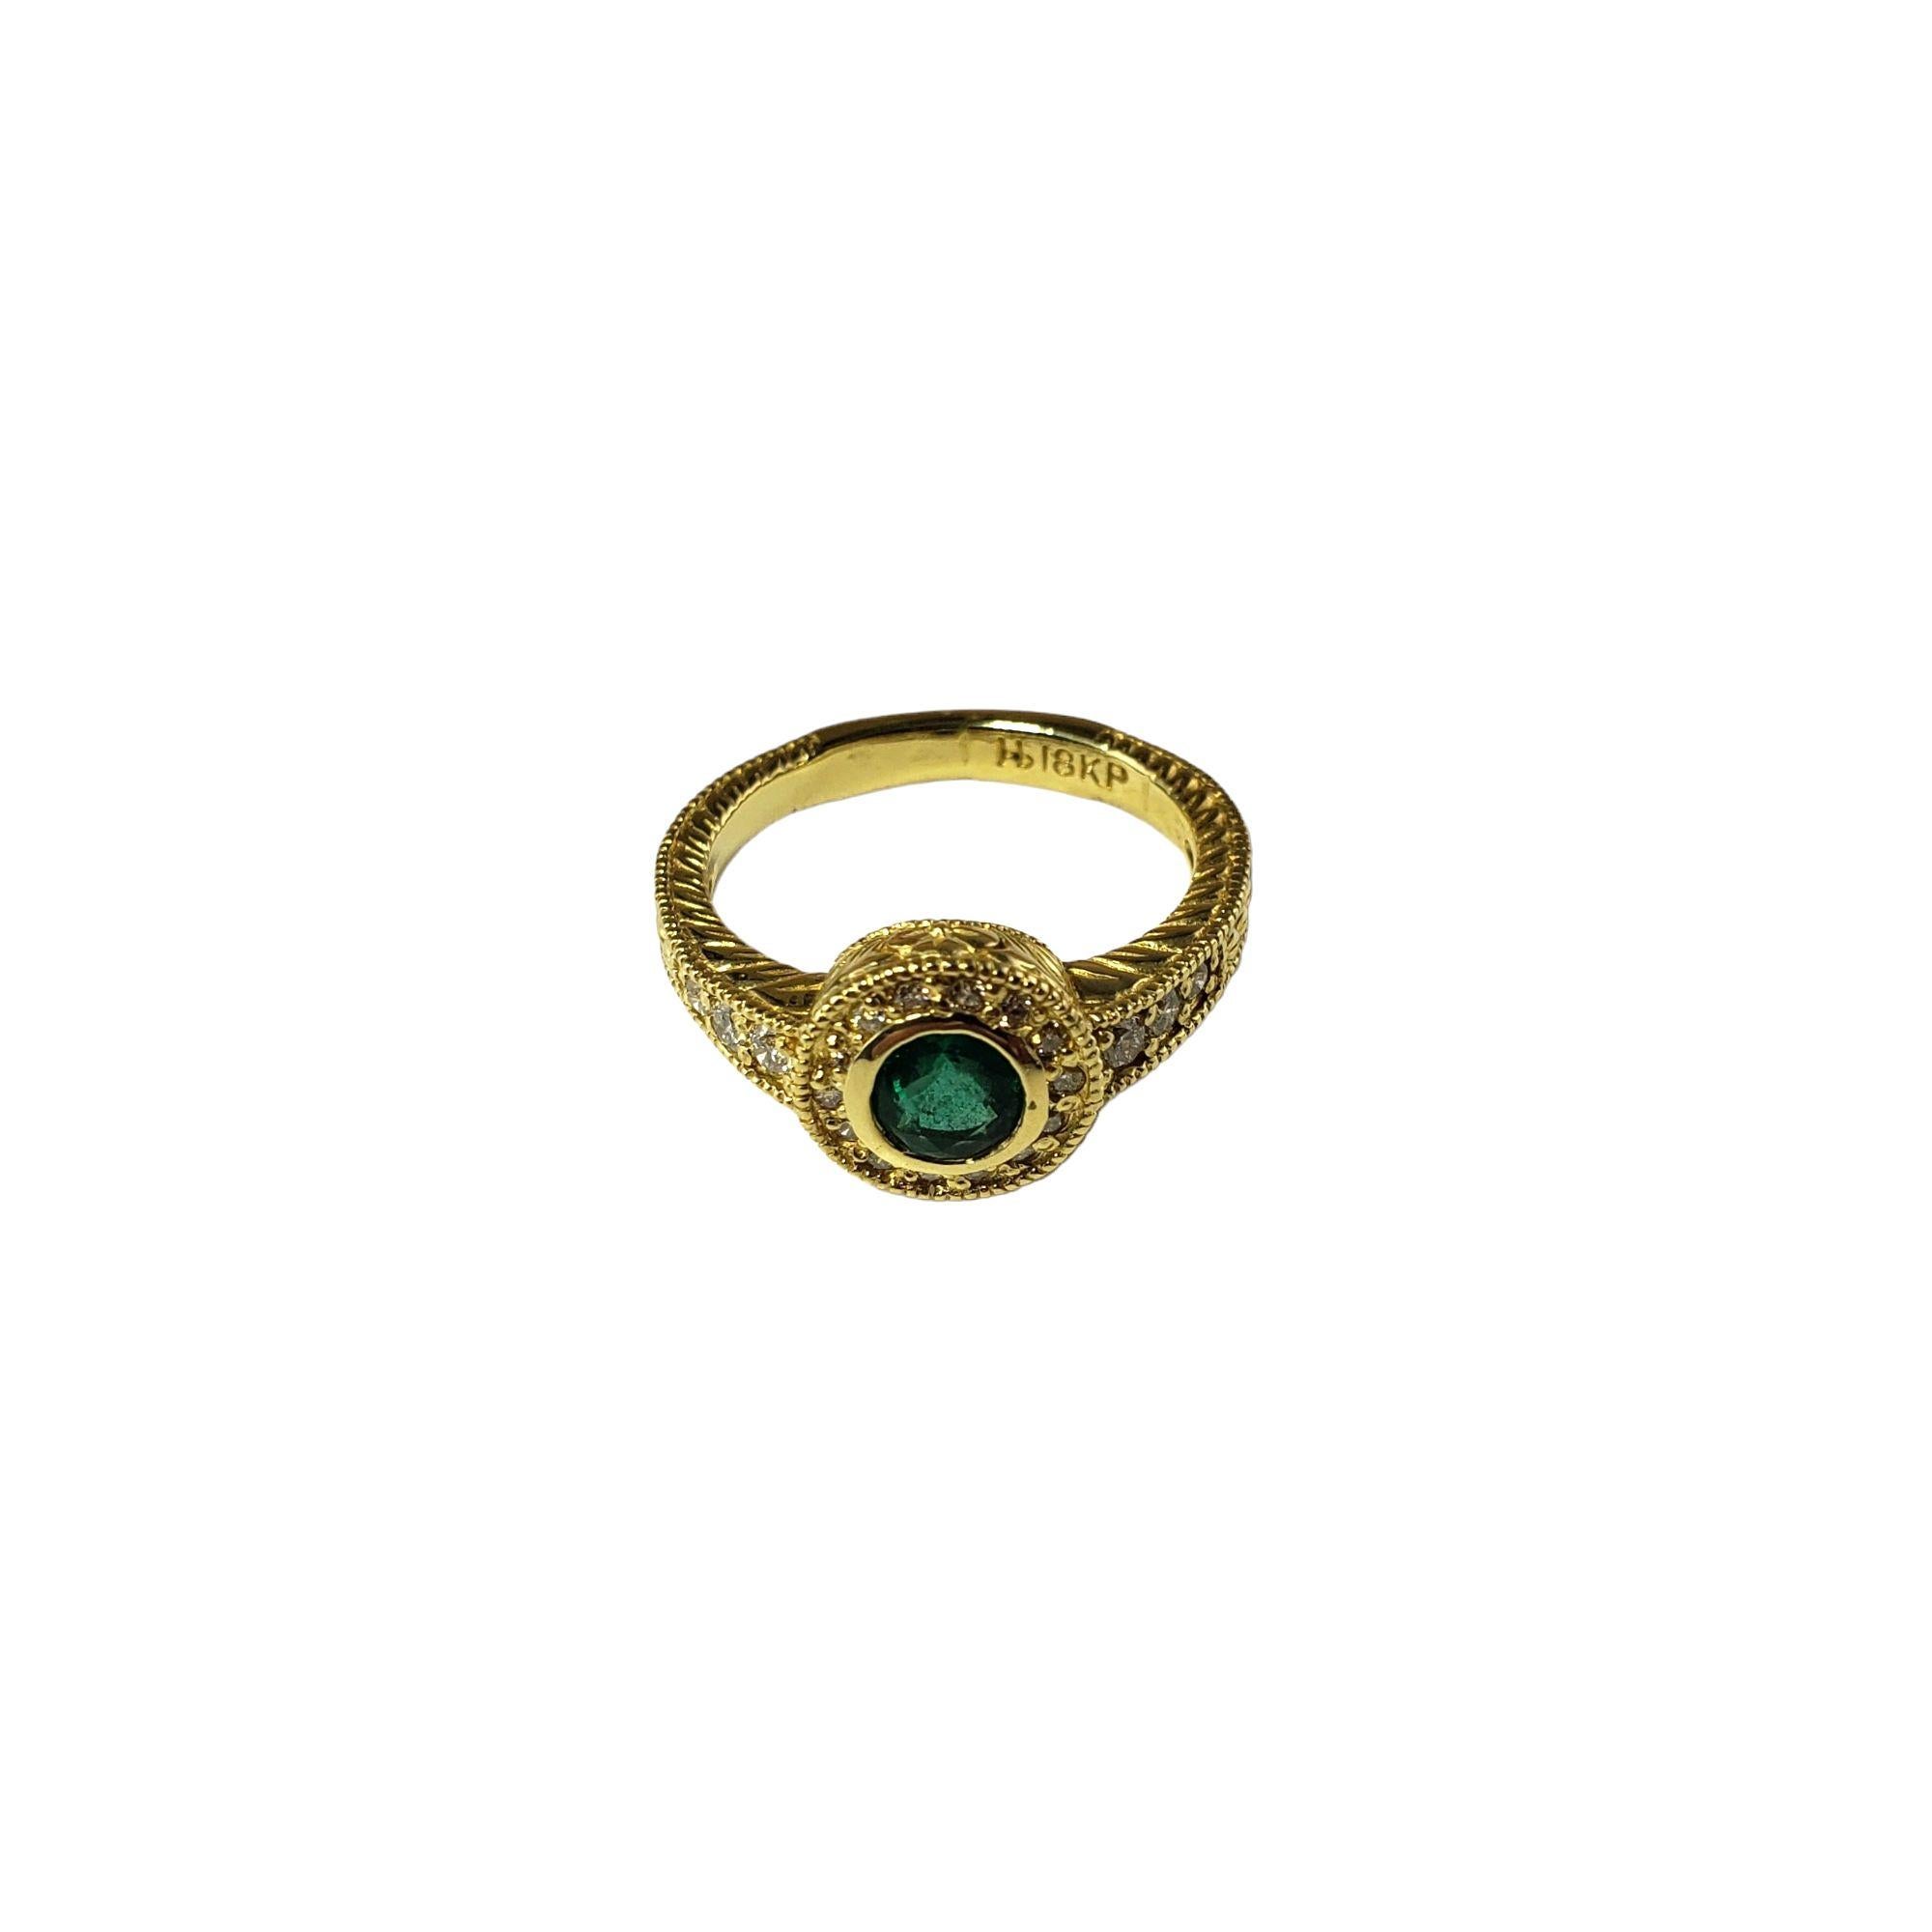 This lovely ring features features one round emerald and 20 round brilliant cut diamonds set in 18K yellow gold.

Width: 9 mm.  Shank: 3 mm.

Approximate total diamond weight:  .20 ct.

Diamond color:  G-H

Diamond clarity:  VS2

Size:  7

Weight: 